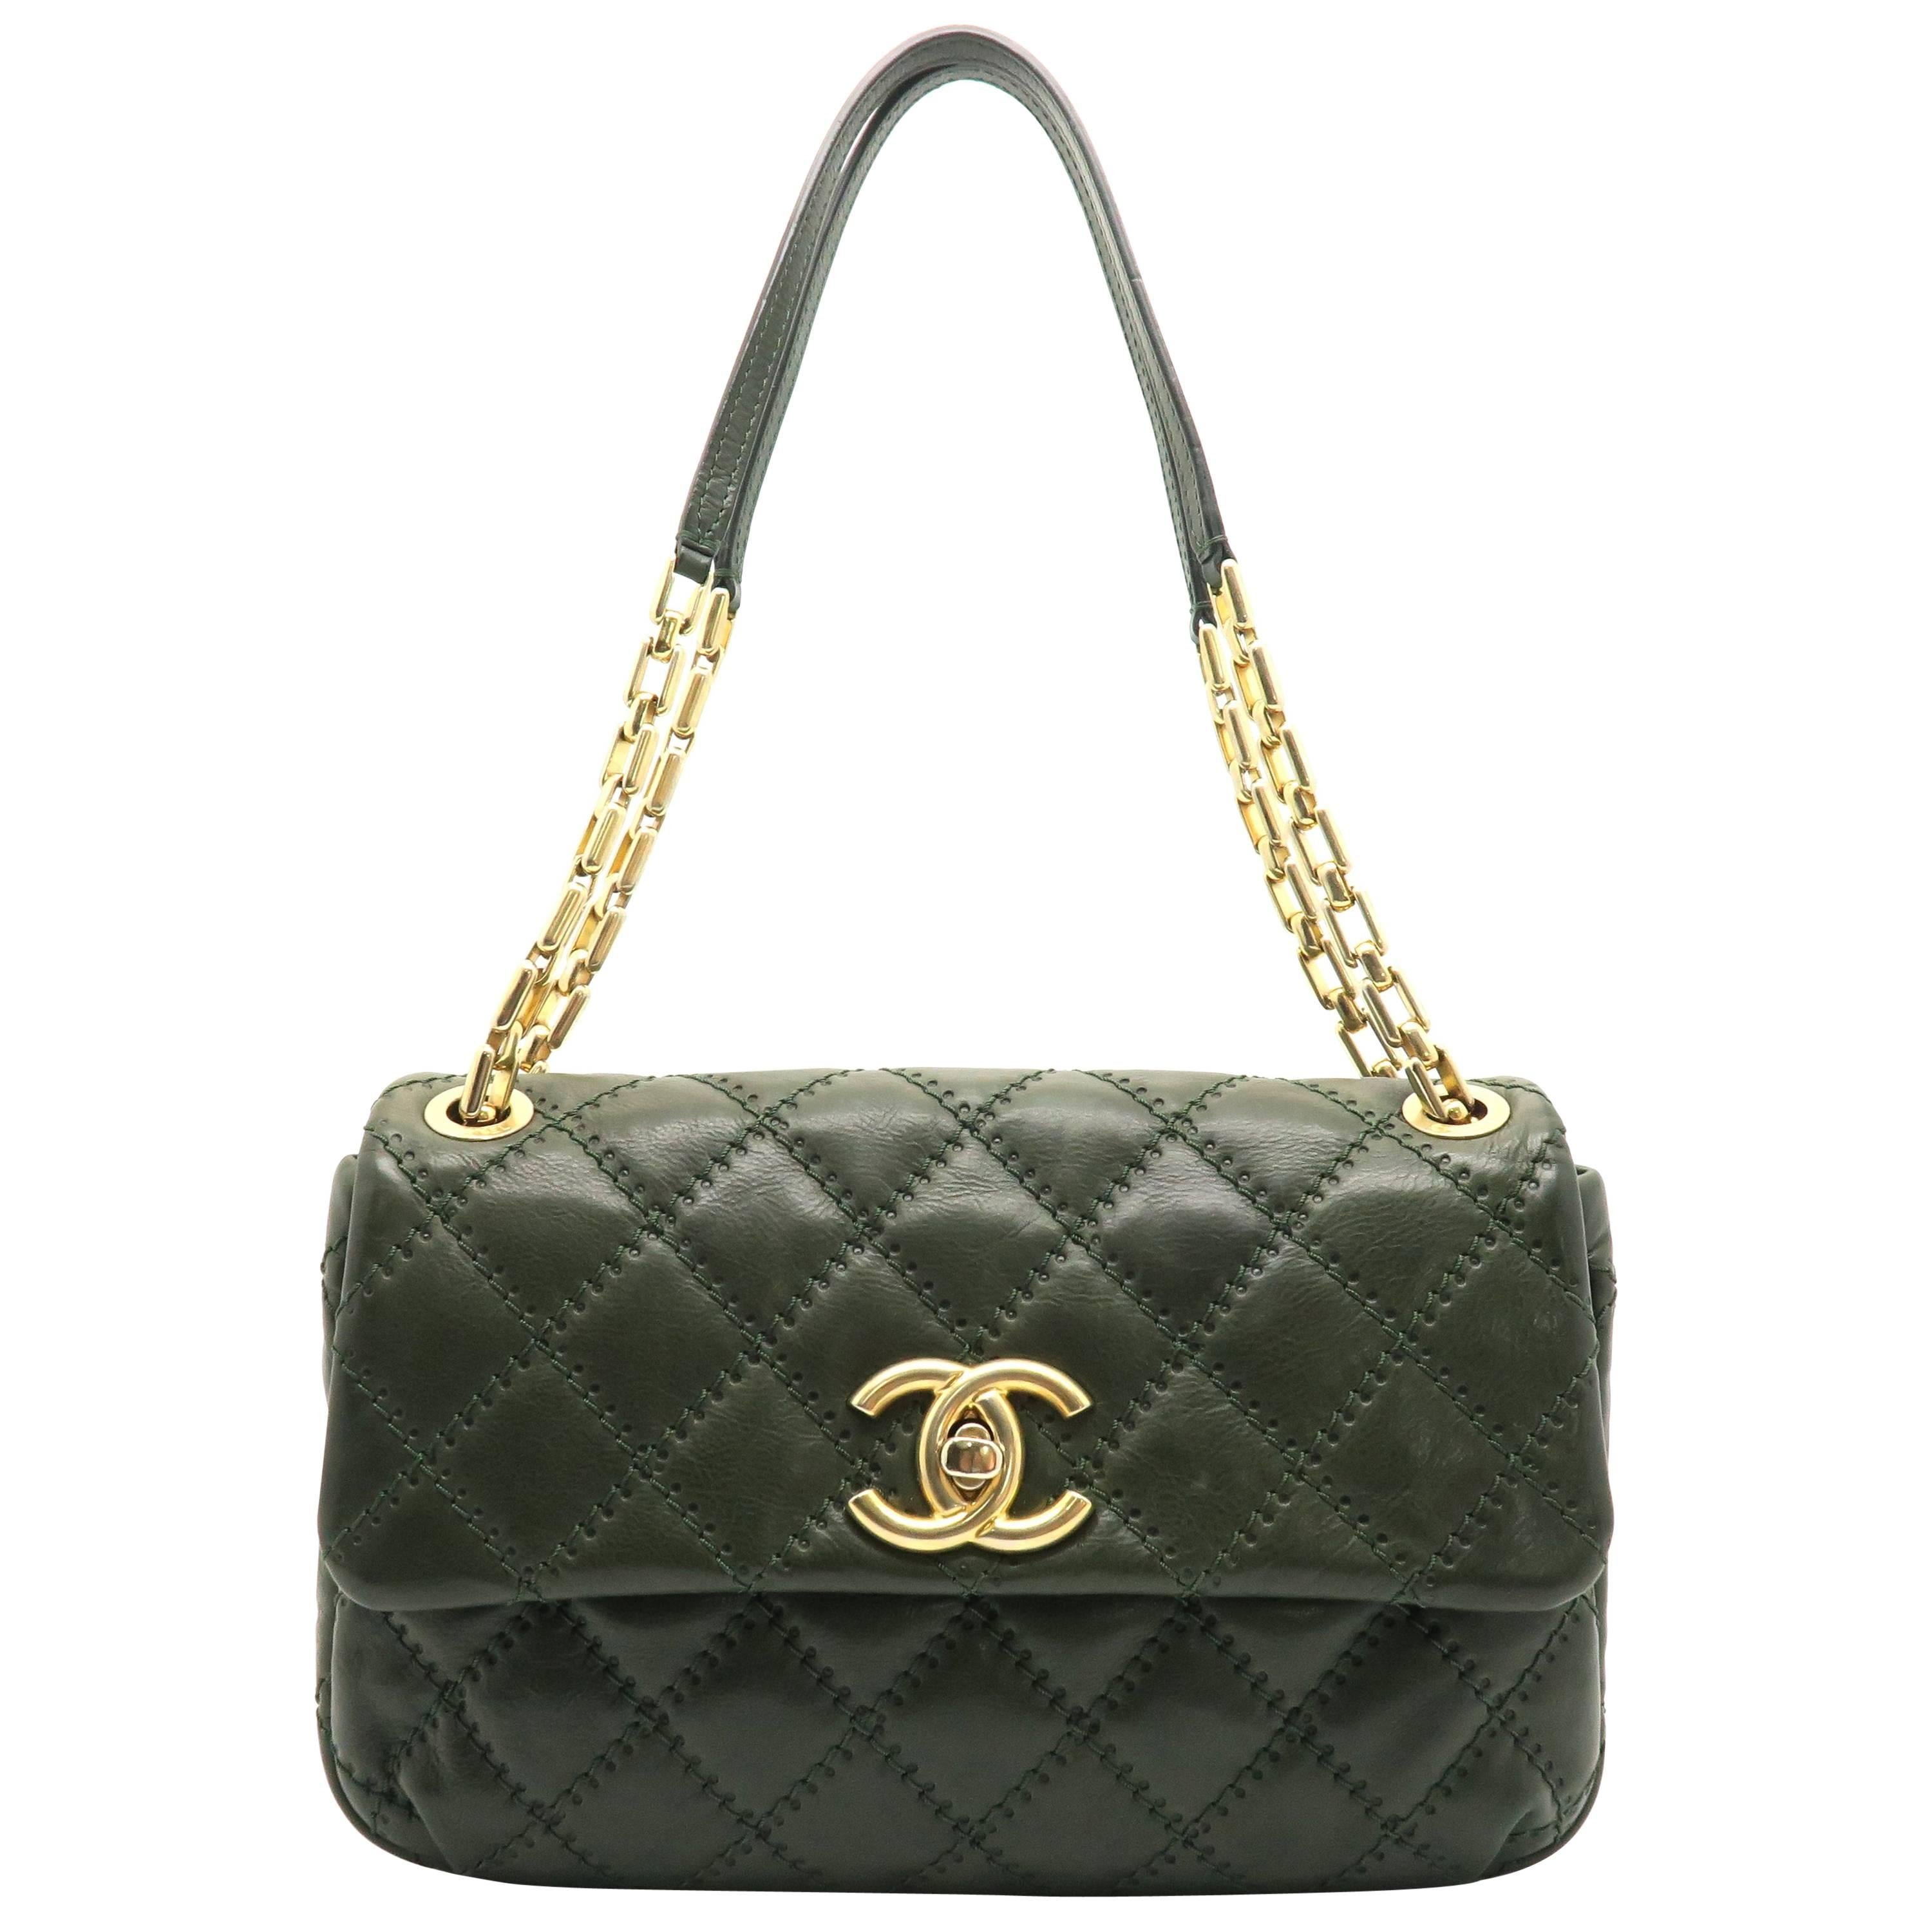 Chanel Green Quilting Calfskin Leather Gold Metal Chain Shoulder Bag For Sale